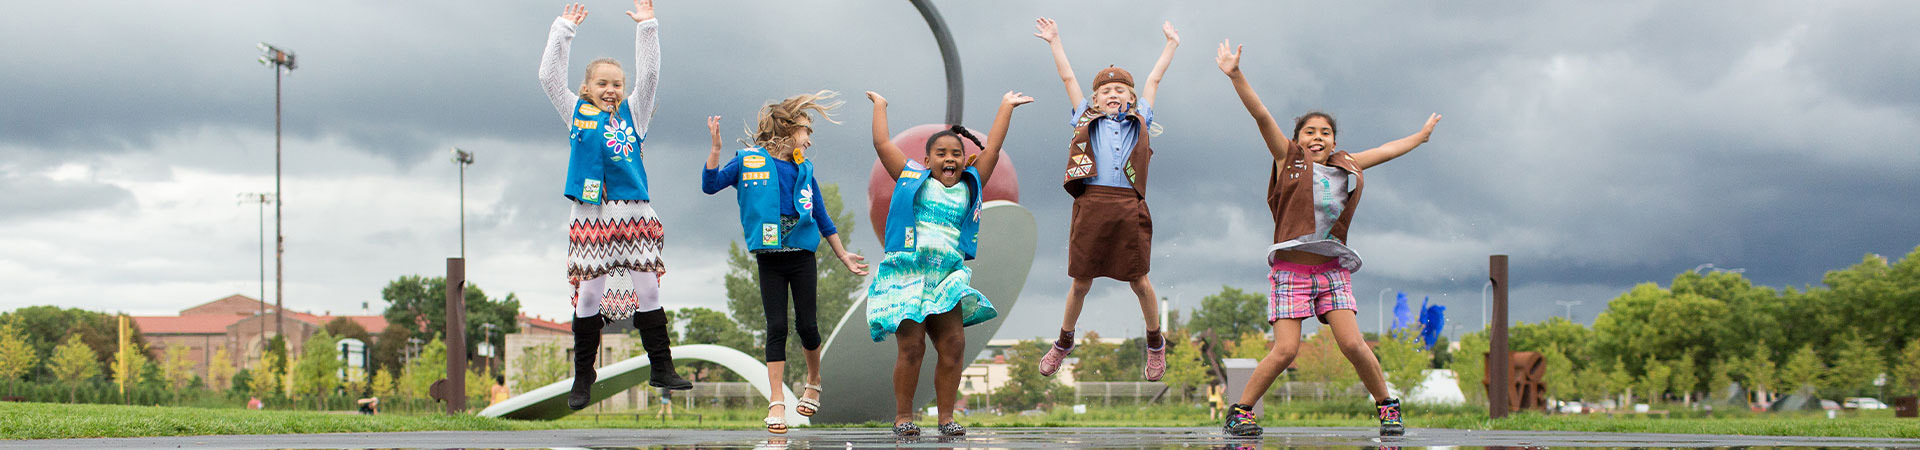  Brownie and Daisy Girl Scouts jumping for a photo in front of the spoon and cherry sculpture at the Minneapolis Sculpture Garden 